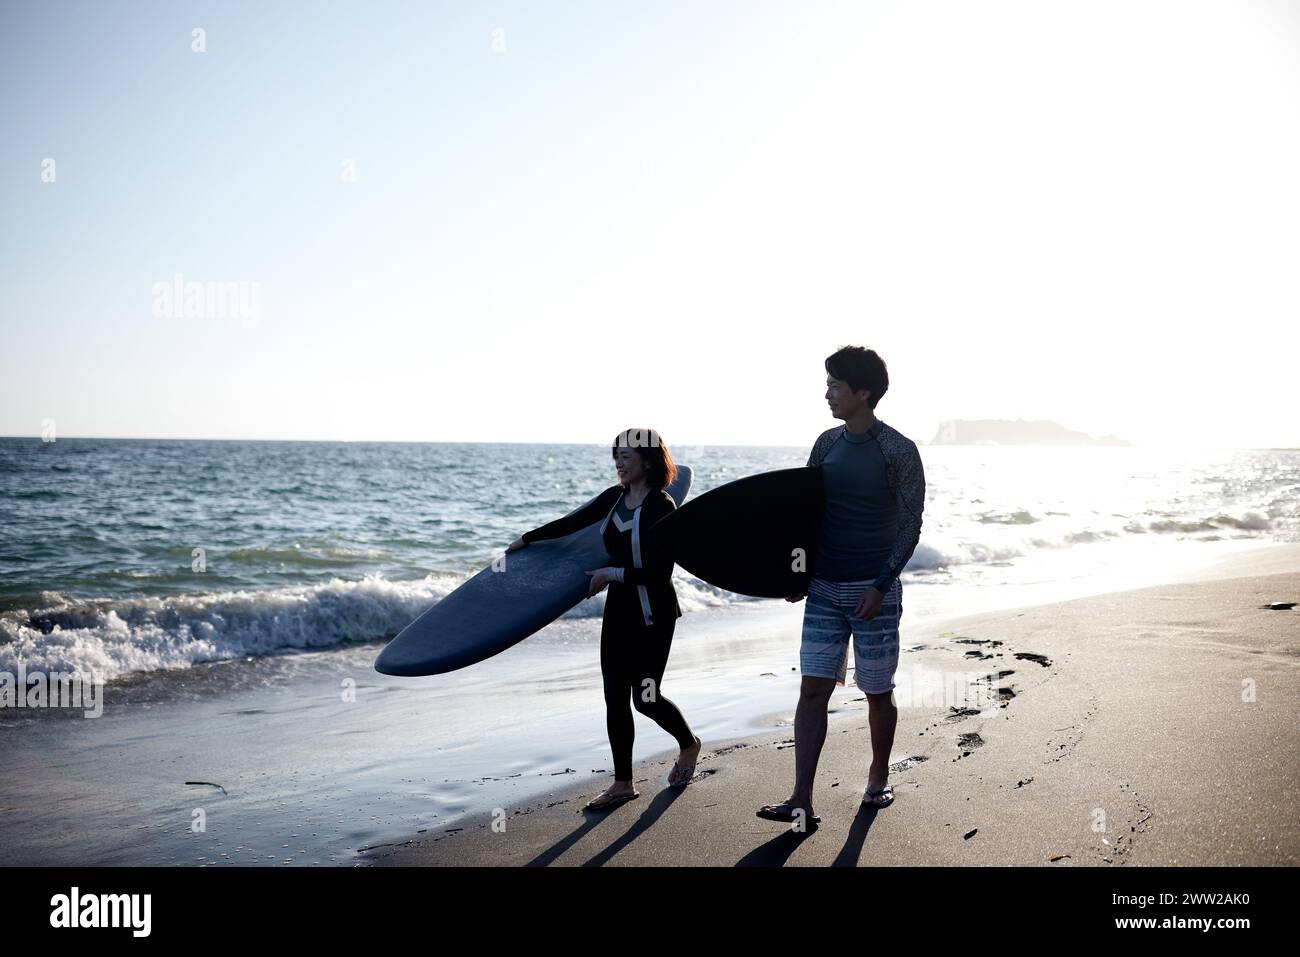 A man and a woman walking on the beach holding surfboards Stock Photo